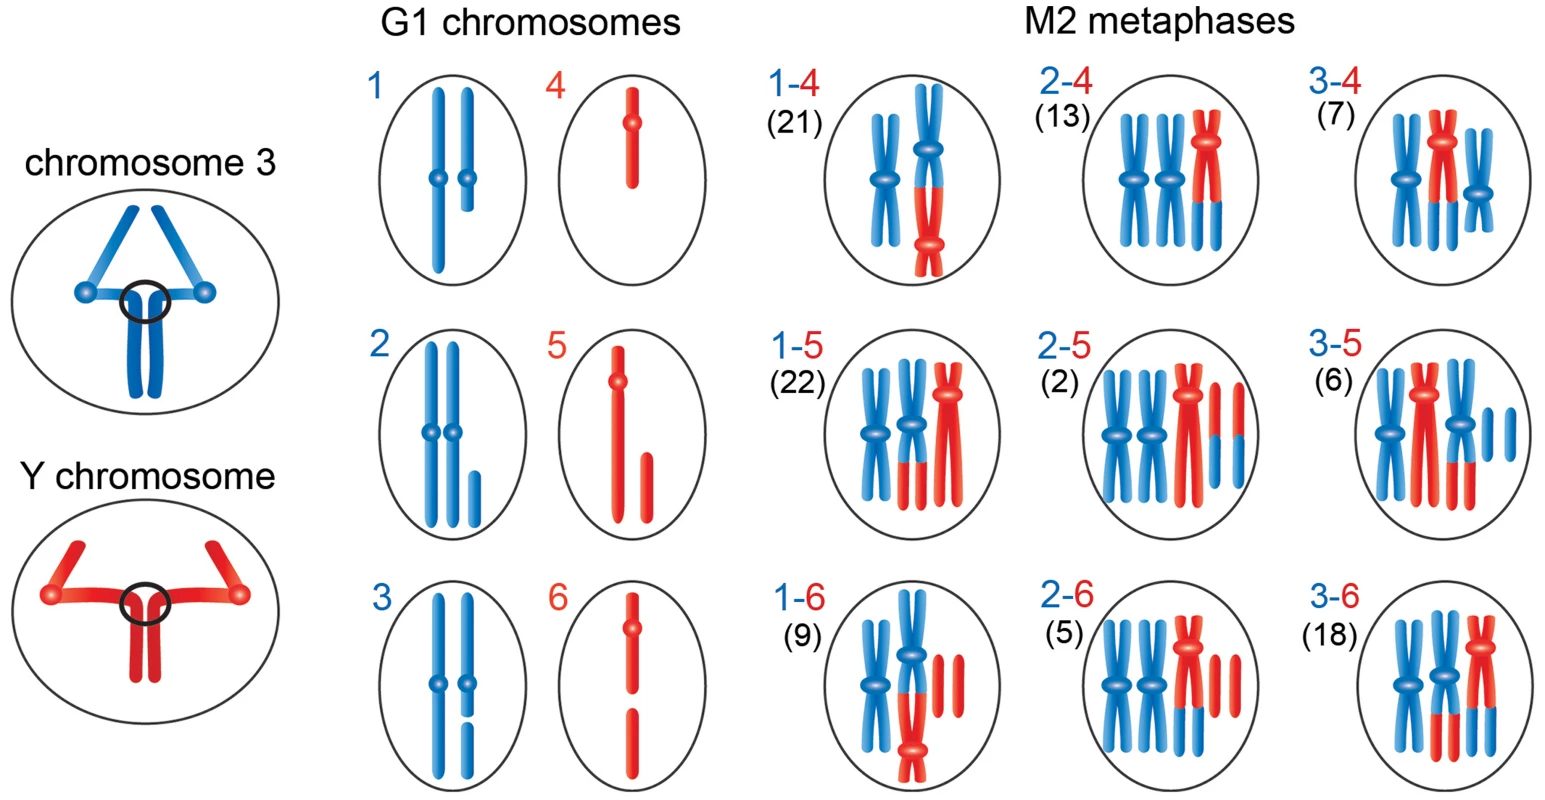 Schematic representation of the events leading to the chromosome rearrangements shown in <em class=&quot;ref&quot;>Figure 3</em>.